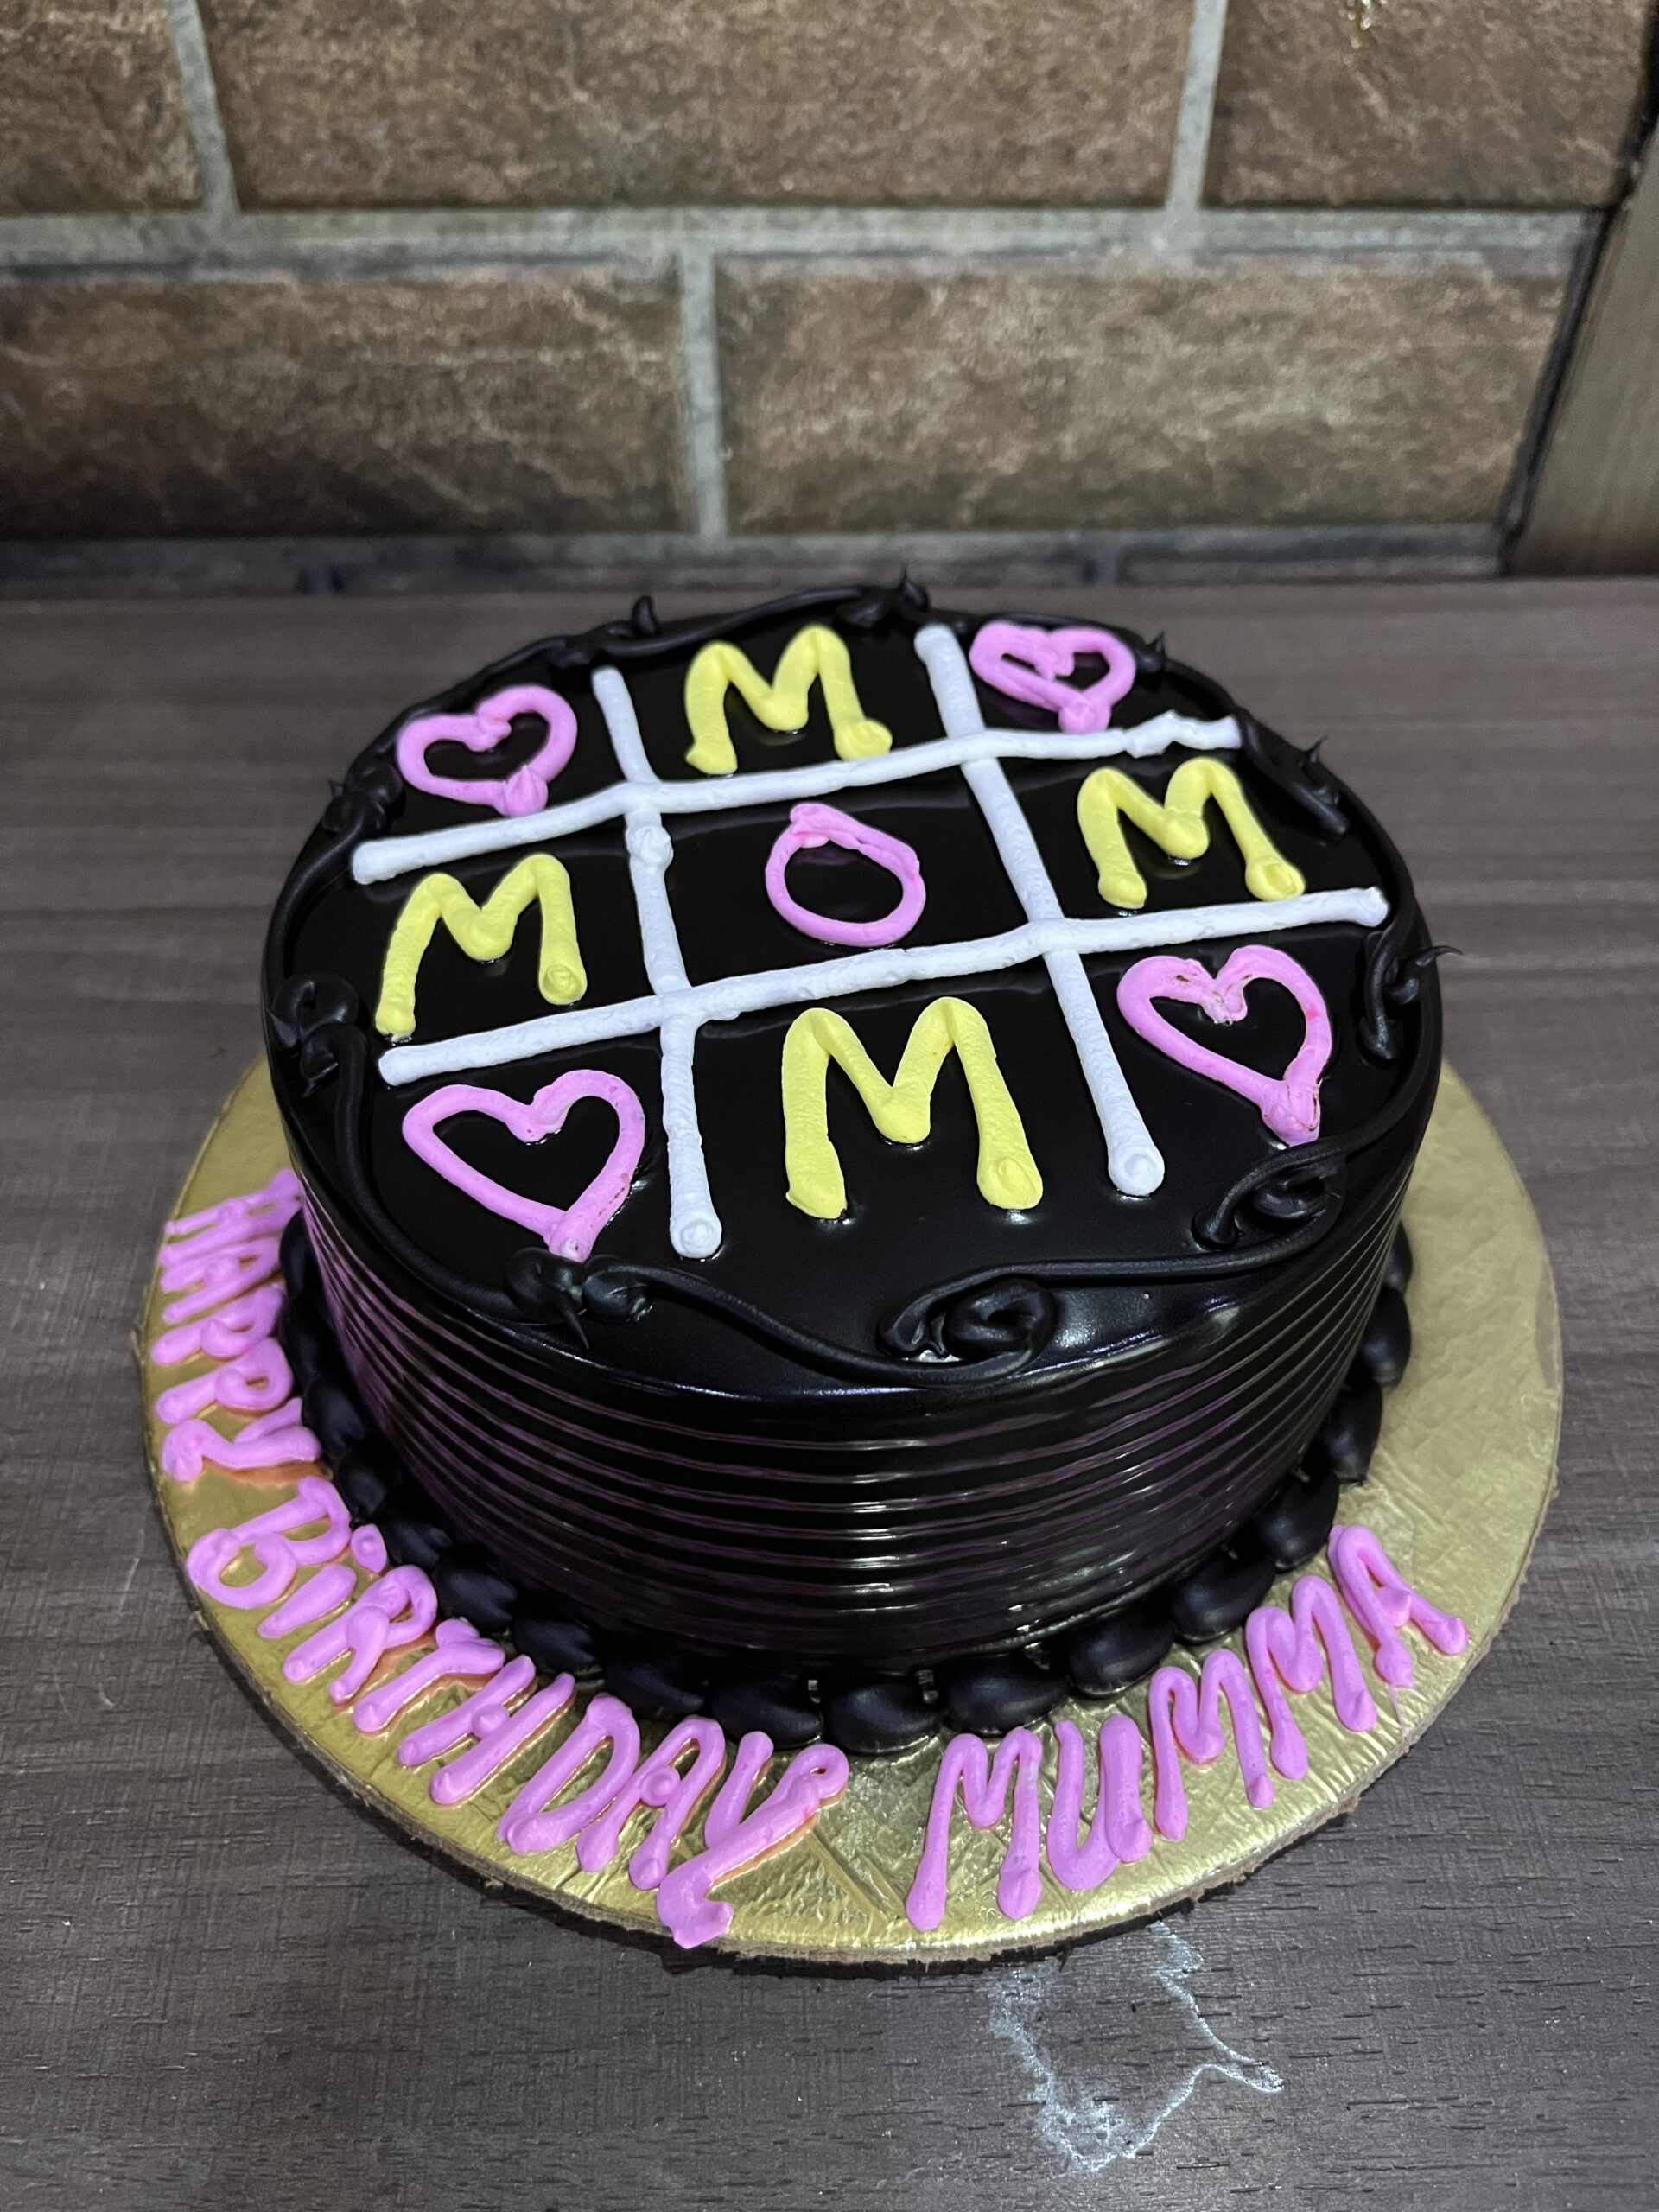 10 Lovely Mother's Day Cake Ideas and More - Find Your Cake Inspiration